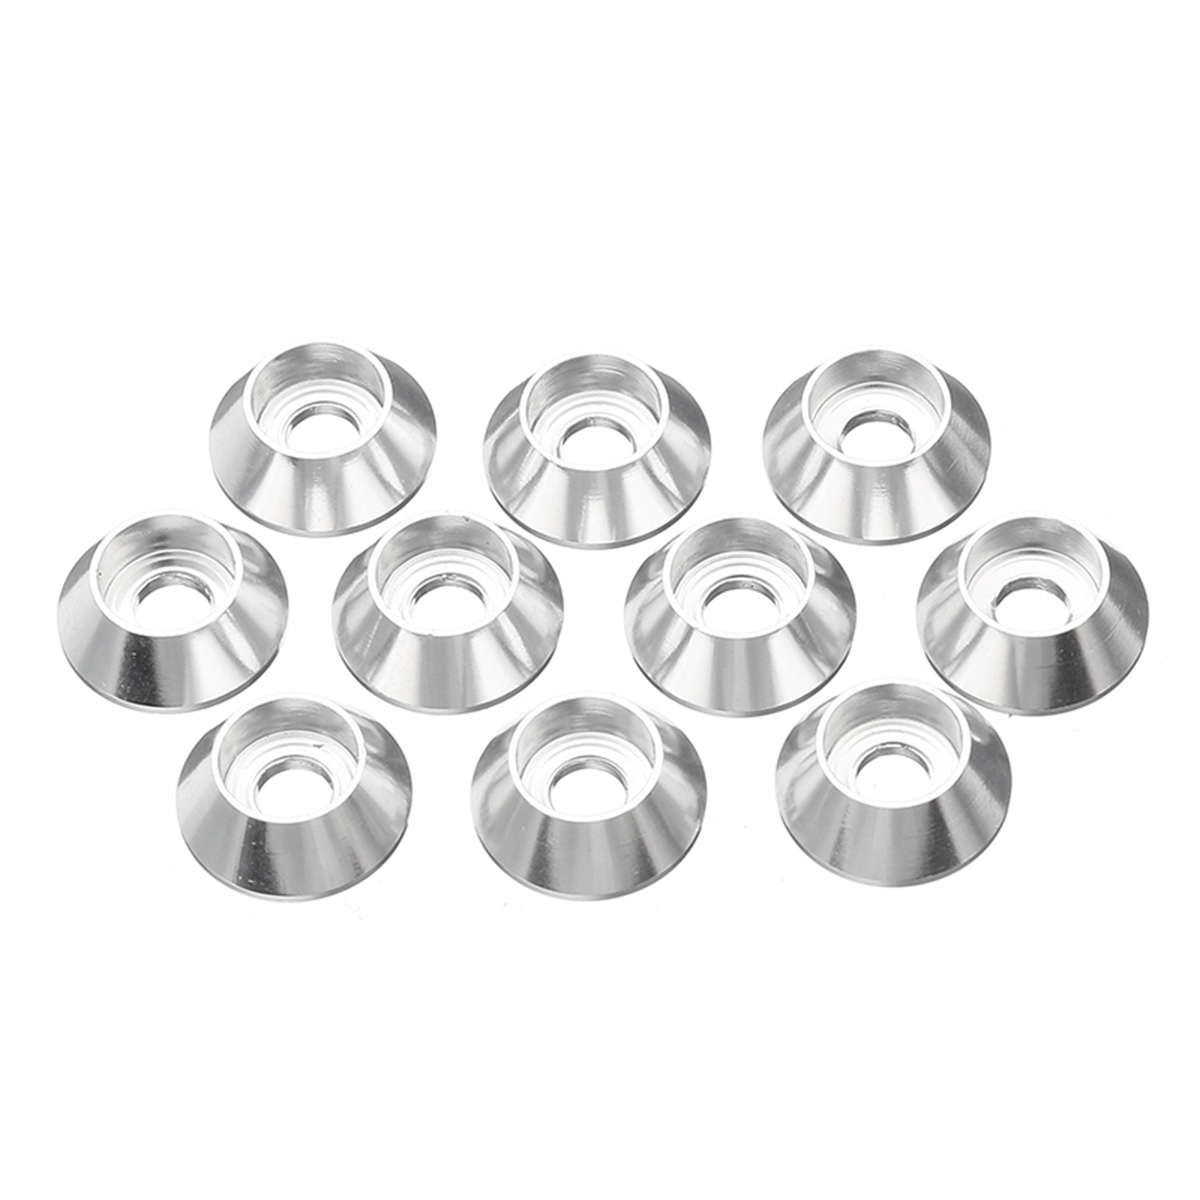 Sulevetrade-M5AN2-10Pcs-M5-Cup-Head-Hex-Screw-Gasket-Washer-Nuts-Aluminum-Alloy-Multicolor-1535744-6